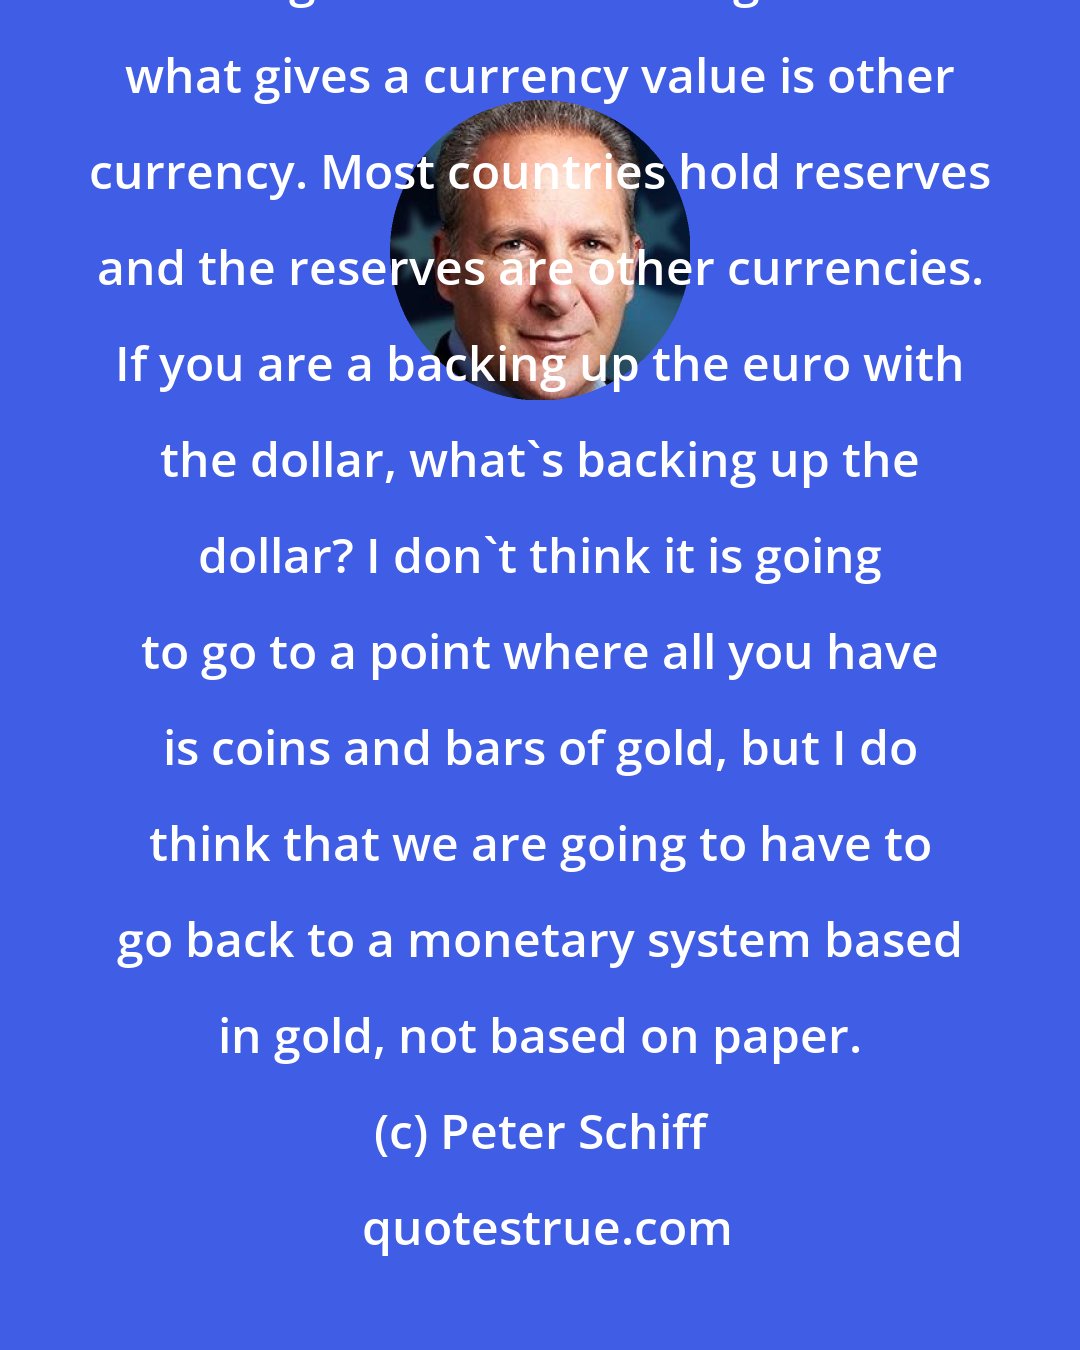 Peter Schiff: Most paper money initially existed as a substitute for gold. That's what gave it value. But right now what gives a currency value is other currency. Most countries hold reserves and the reserves are other currencies. If you are a backing up the euro with the dollar, what's backing up the dollar? I don't think it is going to go to a point where all you have is coins and bars of gold, but I do think that we are going to have to go back to a monetary system based in gold, not based on paper.